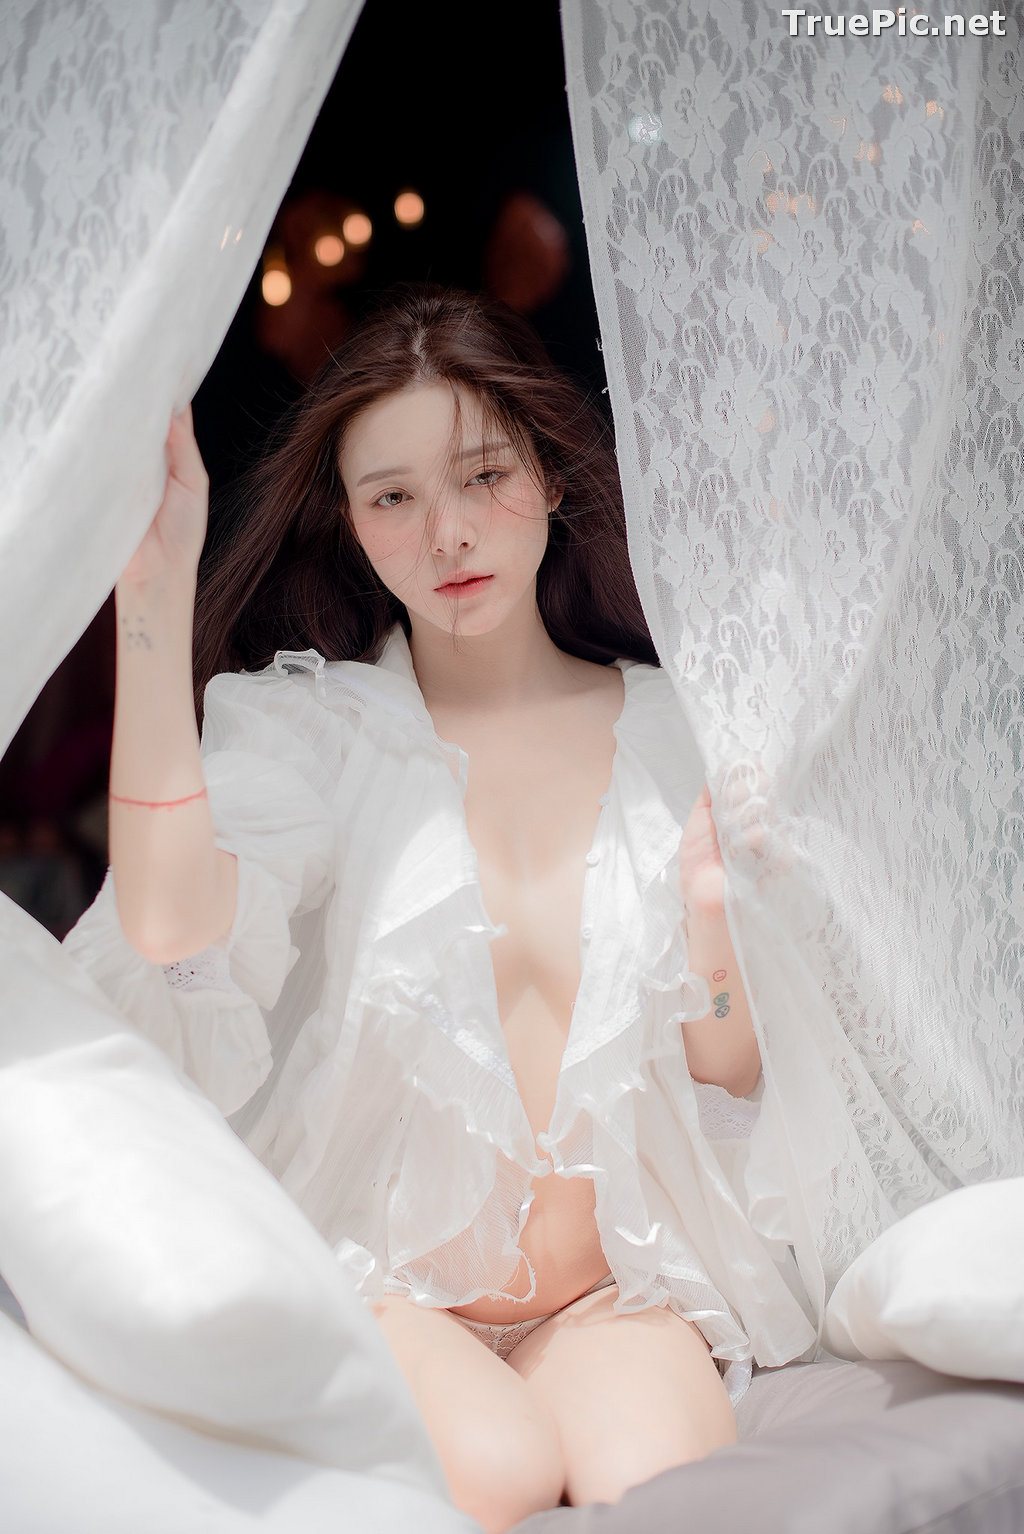 Image Thailand Model - Nardear Montgod - Sexy Beautiful In White - TruePic.net - Picture-27